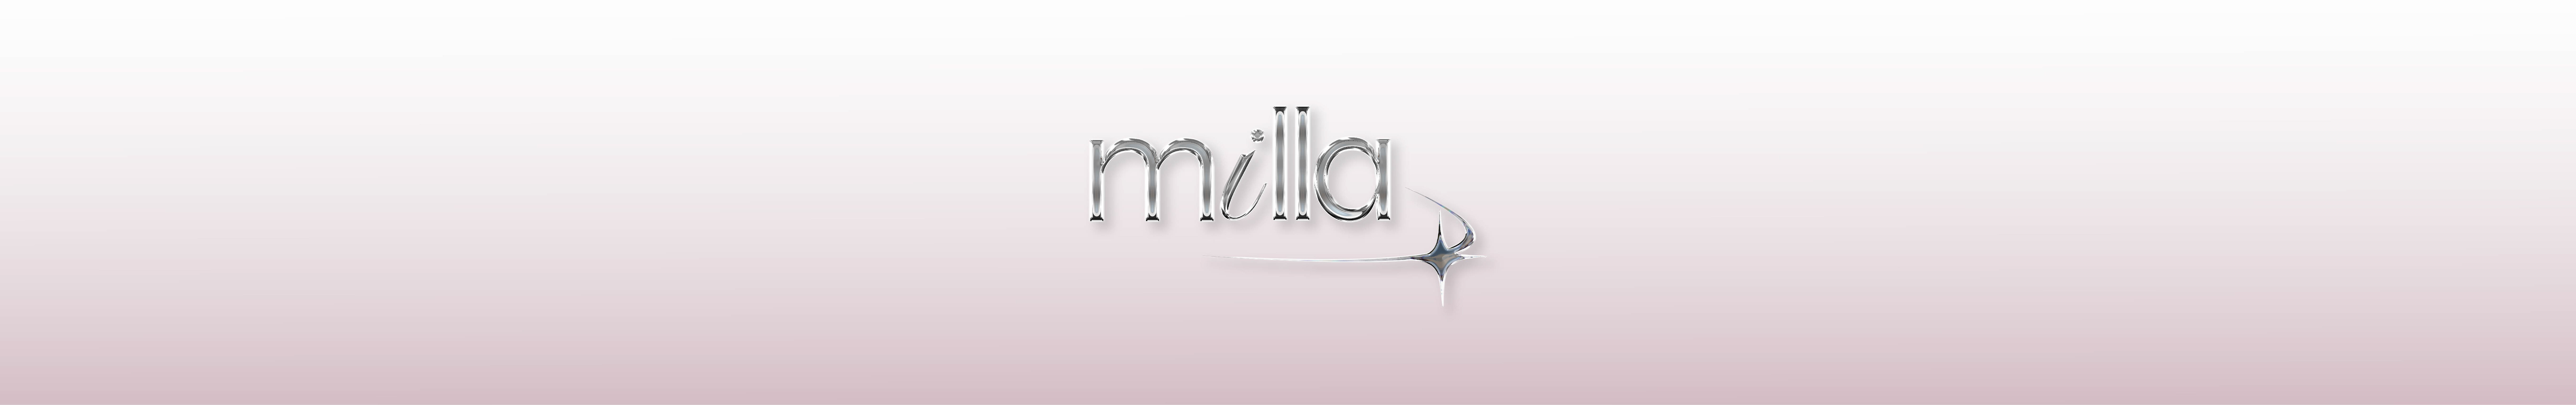 Milla Paves's profile banner